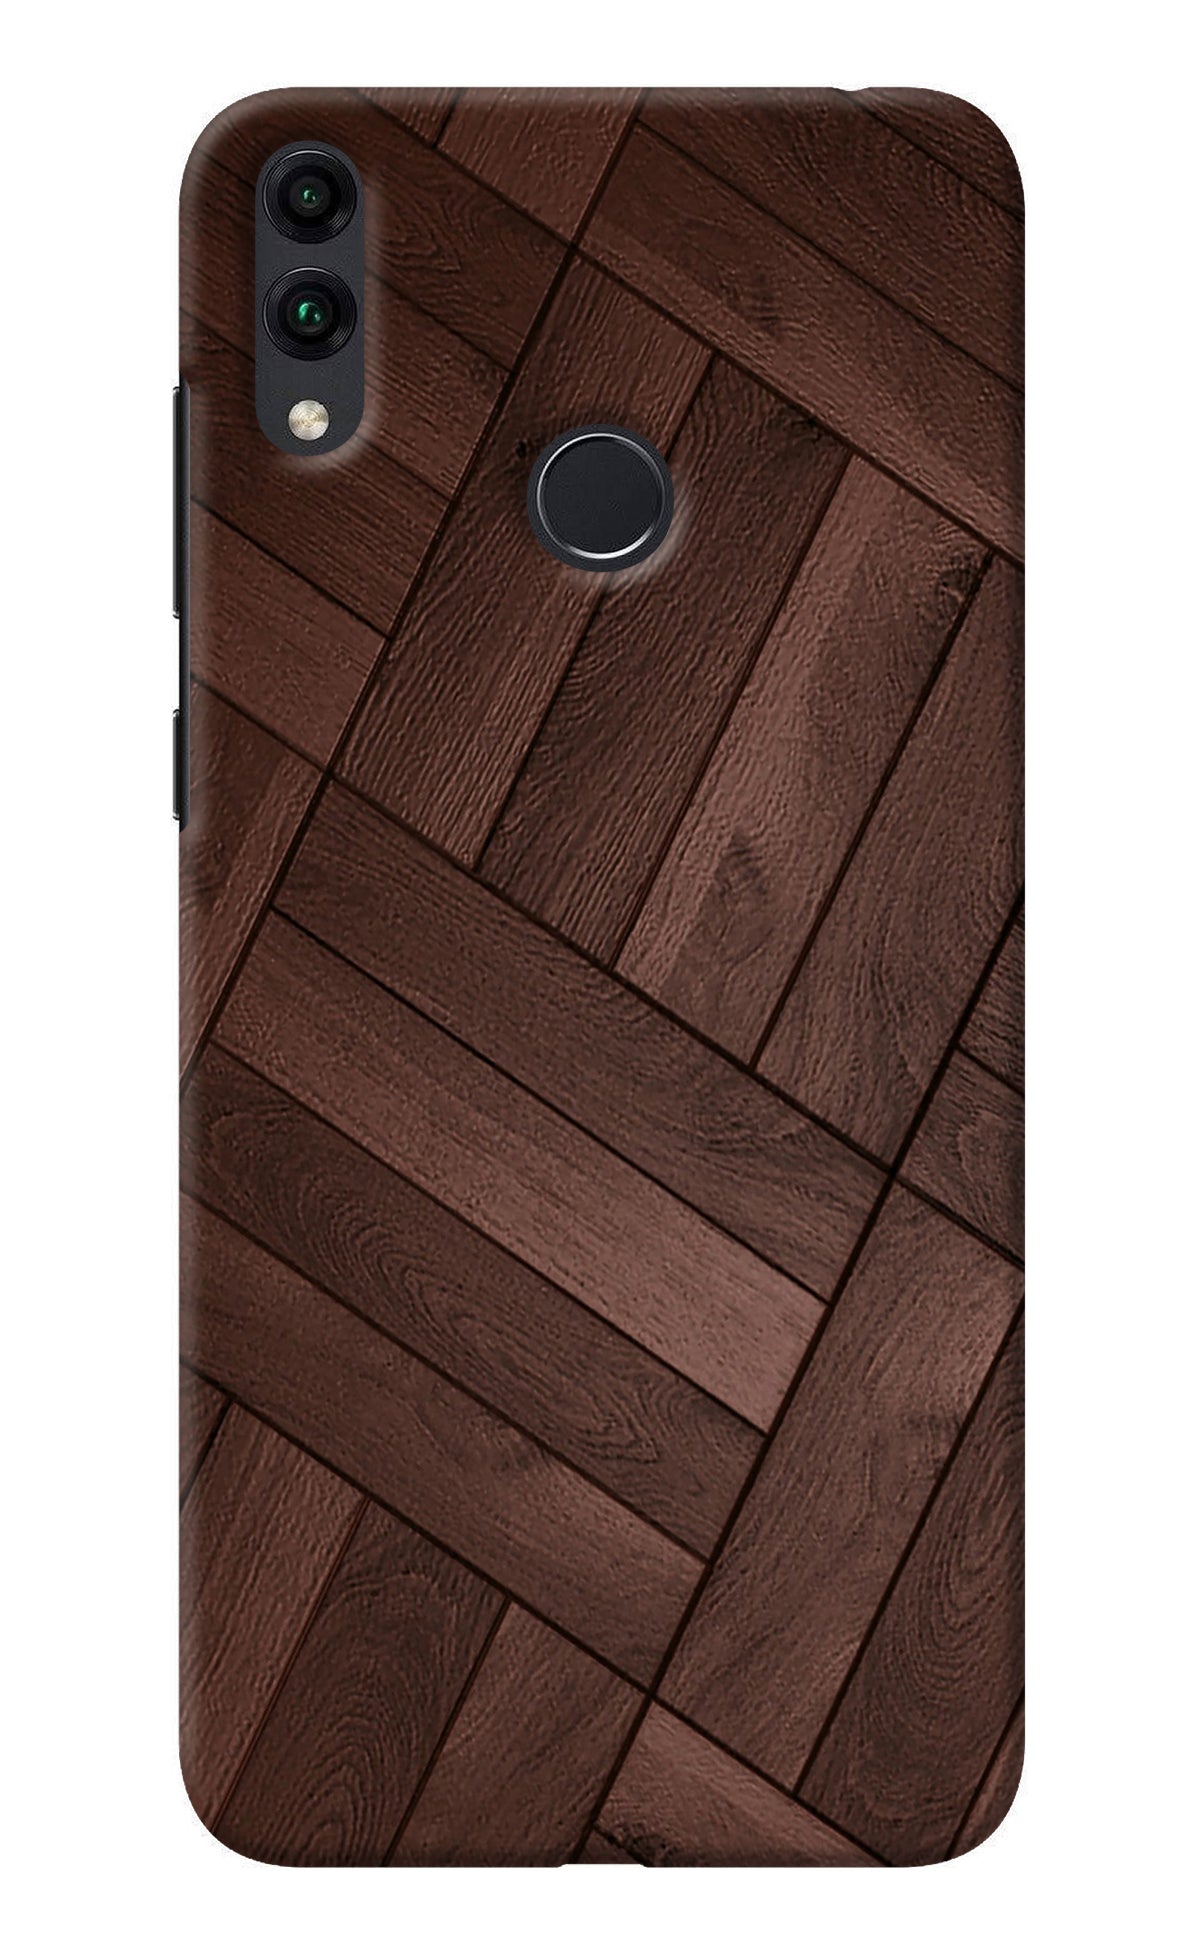 Wooden Texture Design Honor 8C Back Cover